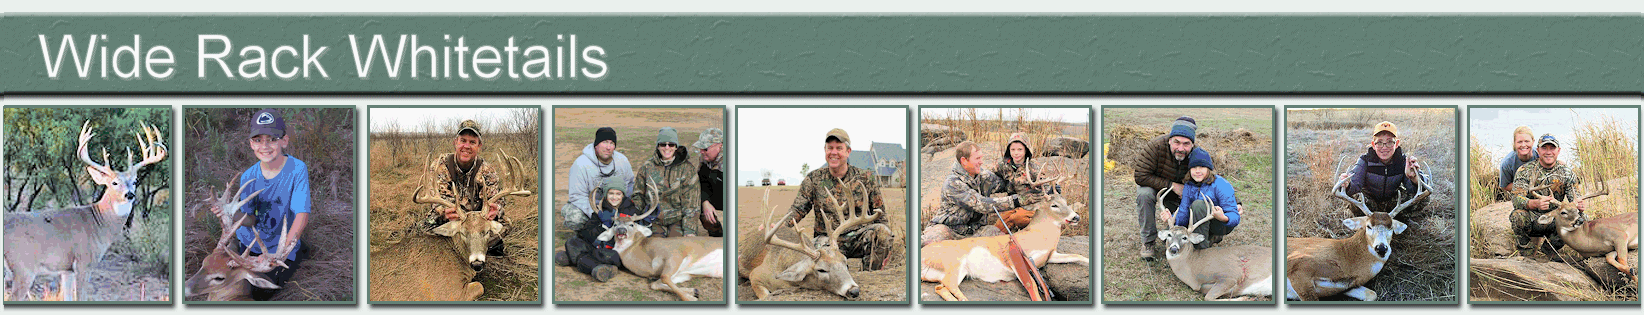 trophy_whitetail_hunting.htm